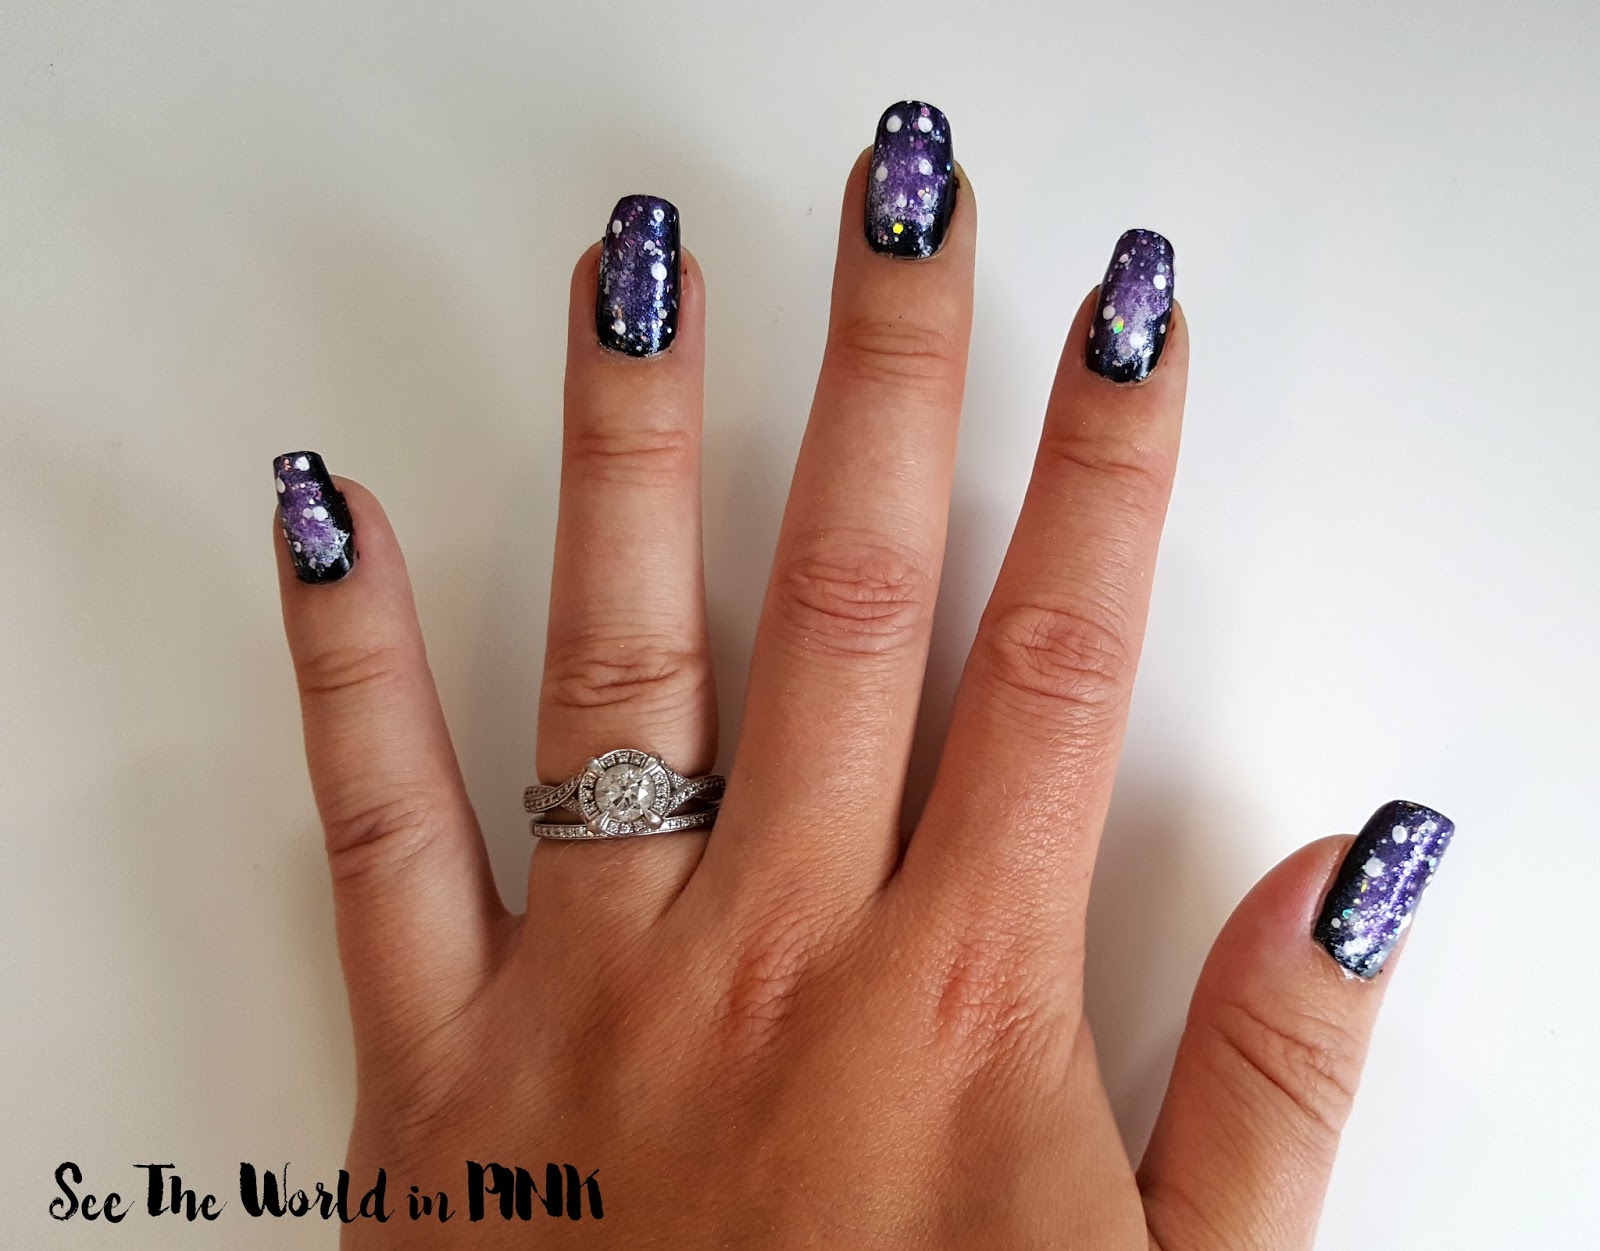 1. Galaxy Nail Art Tutorial: Step by Step Guide - wide 3